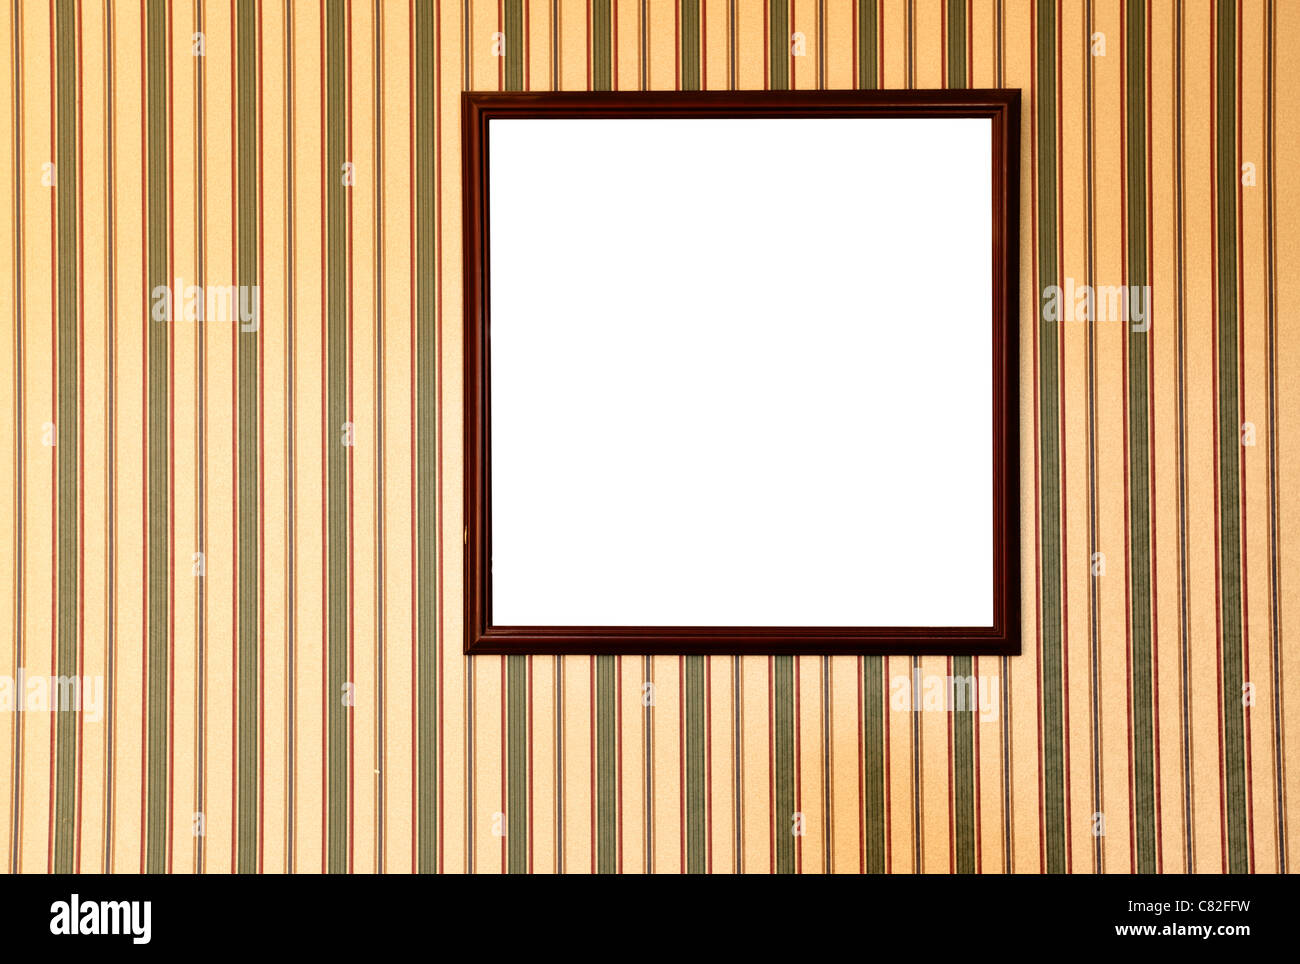 Blank frame on wall with striped wallpaper Stock Photo